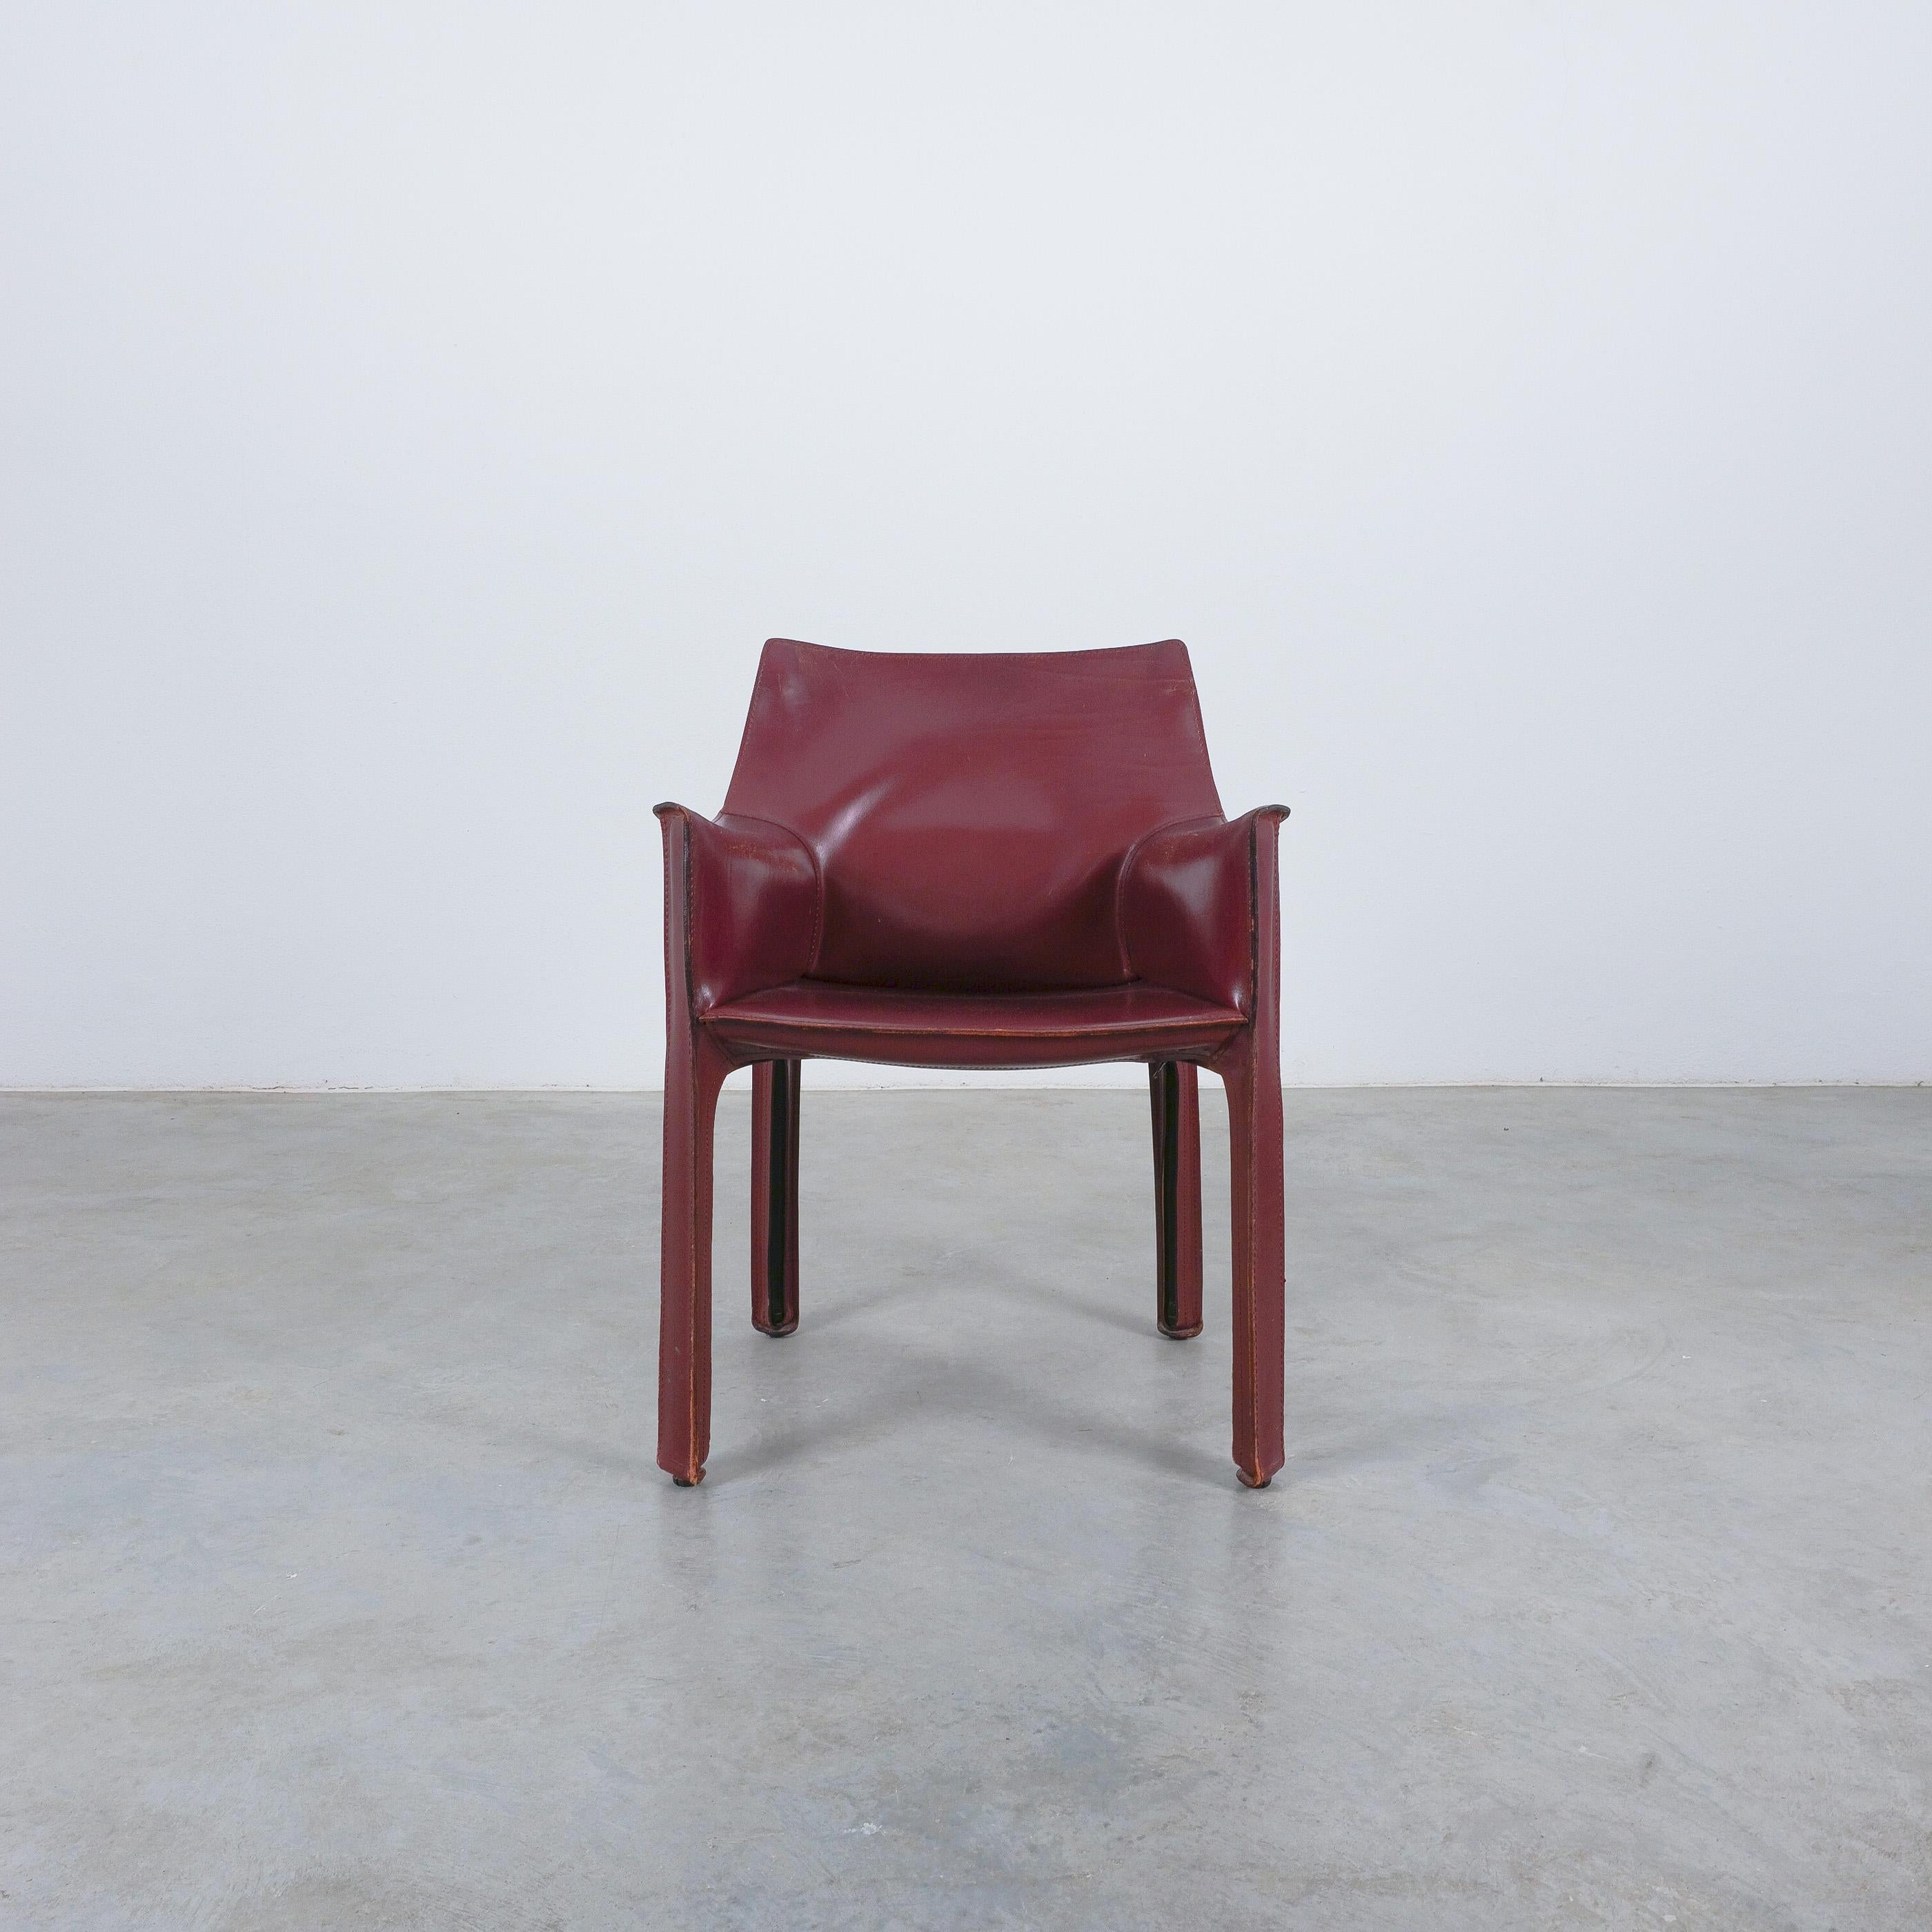 Steel Mario Bellini Cassina Cab 413 Burgundy Red Leather Dining Chairs, 1980 For Sale